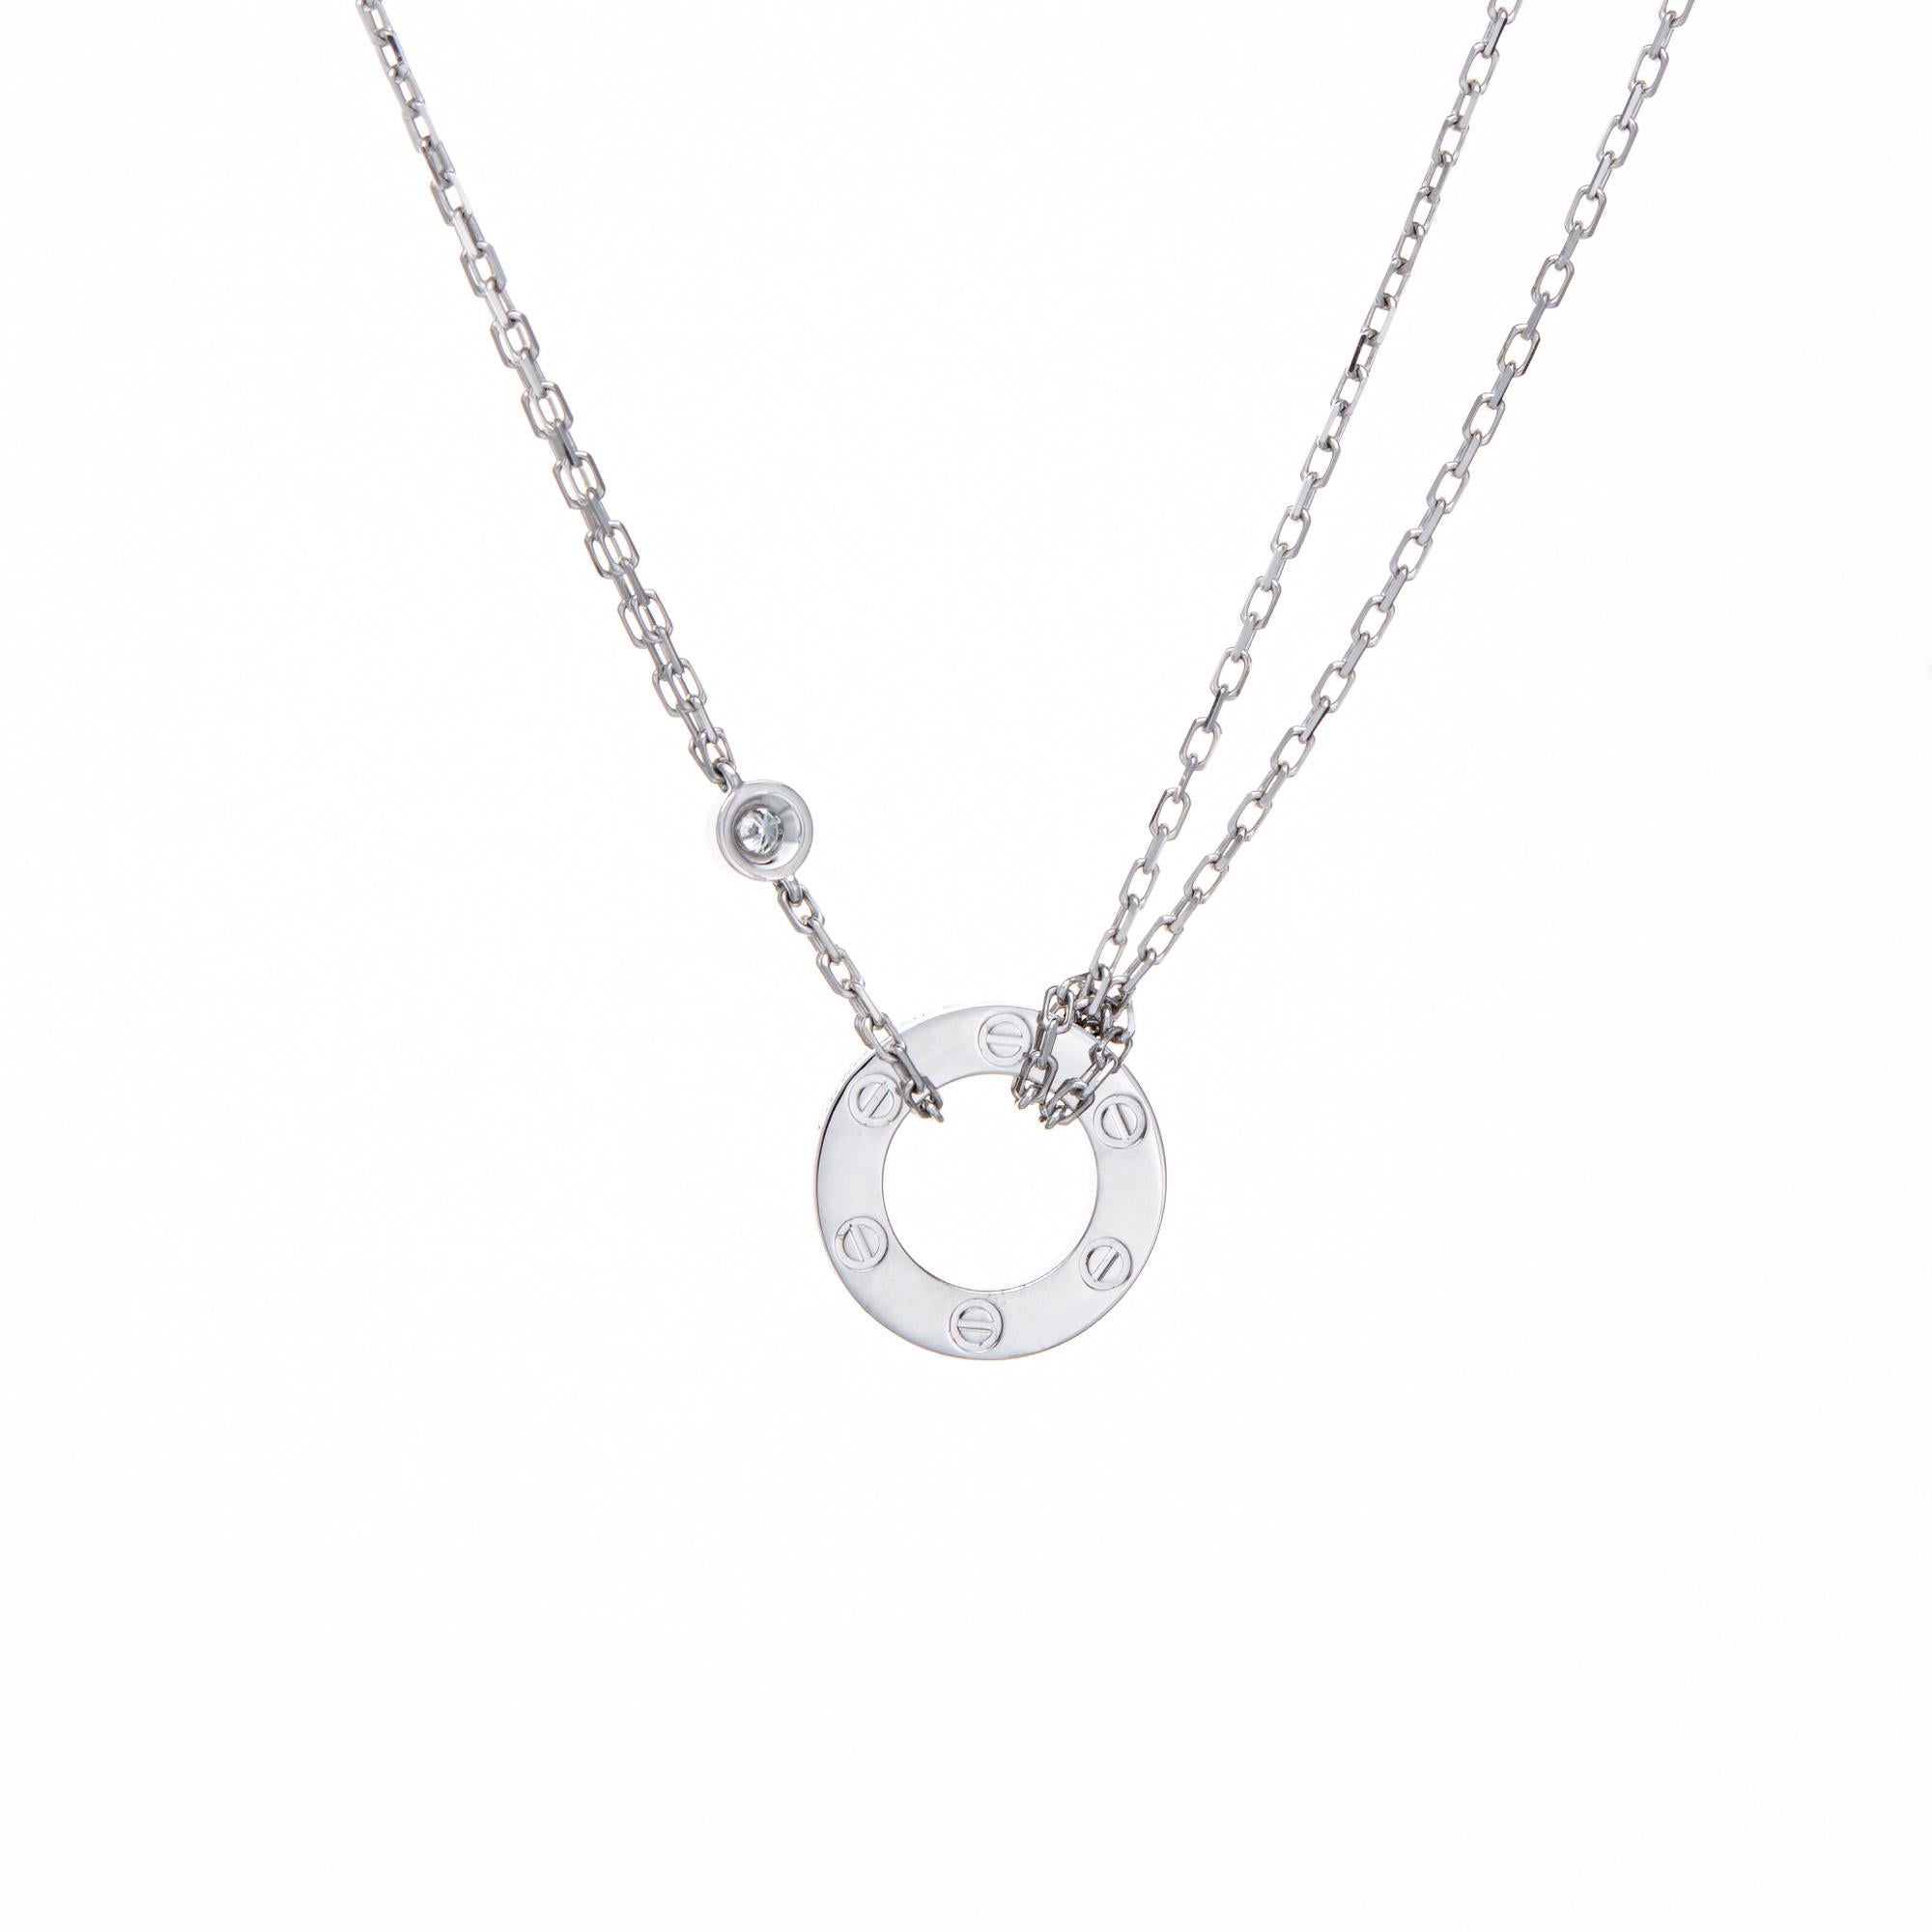 Pre-owned Cartier Diamond Love necklace crafted in 18k white gold.  

2 diamonds total 0.03 carats (estimated at G-H color and VVS2 clarity). The classic Cartier necklace features a double chain with a diamond set LOVE inscribed center. The necklace